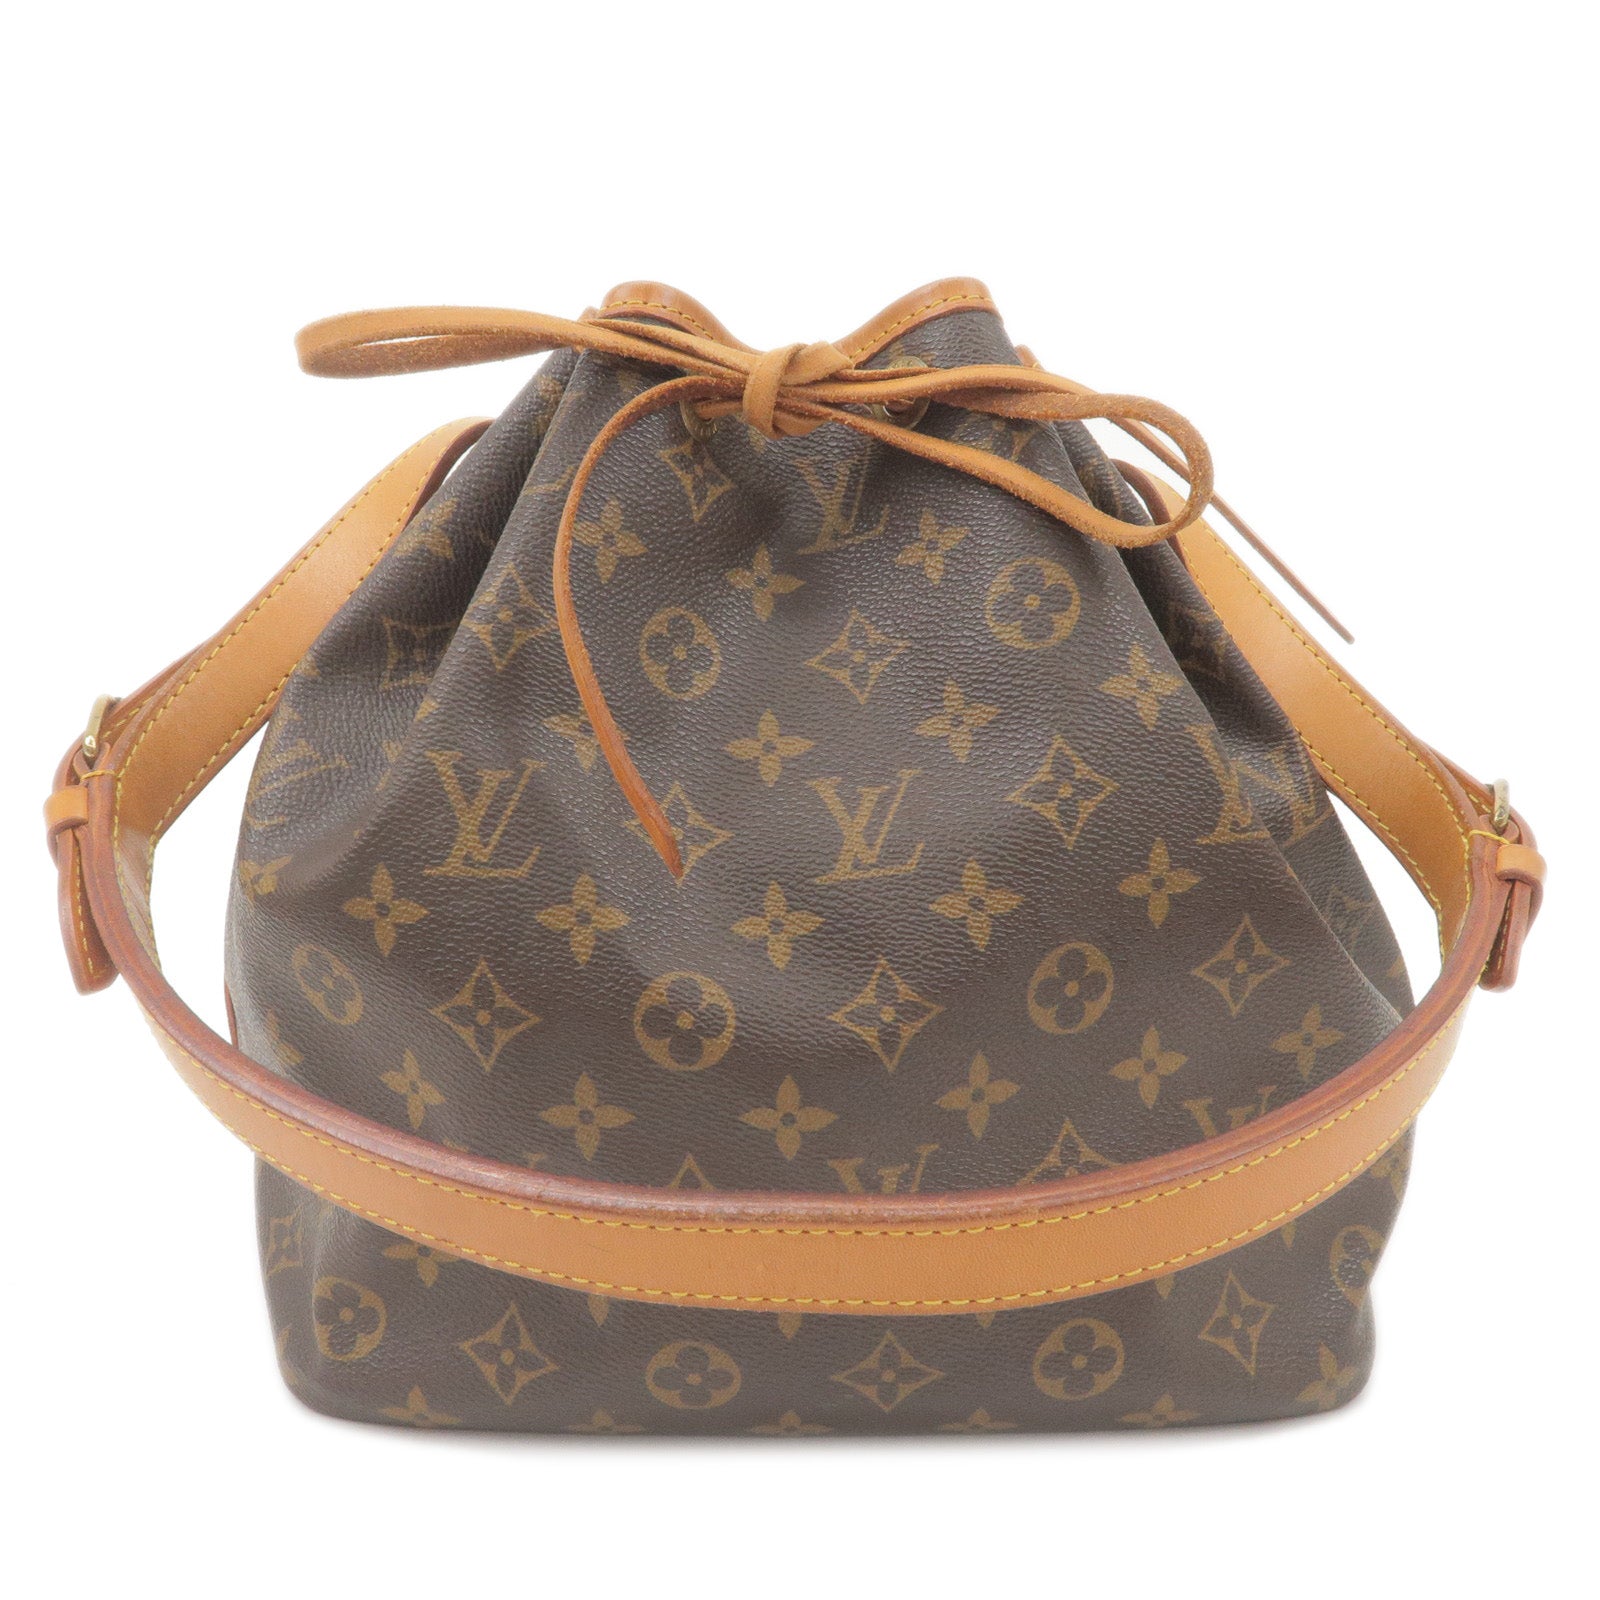 LOUIS VUITTON PETIT NOE - 1 Year Review & Update, Would I Still Buy? 